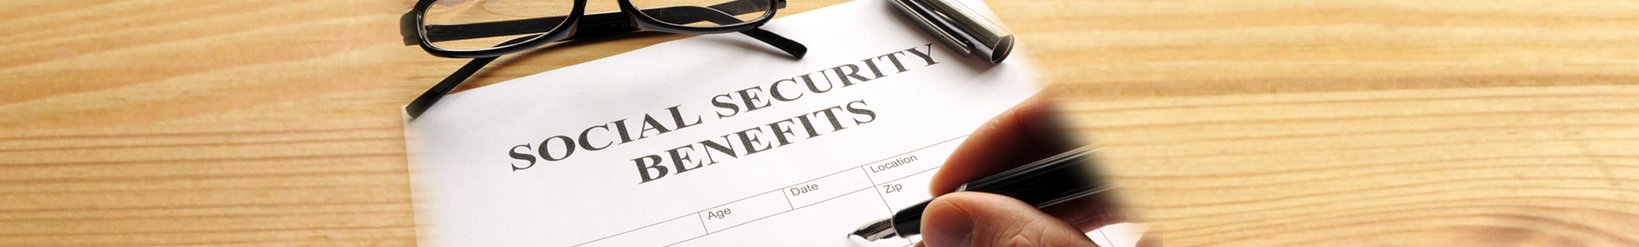 Social Security Disability Benefits for Diabetes (Page 1)